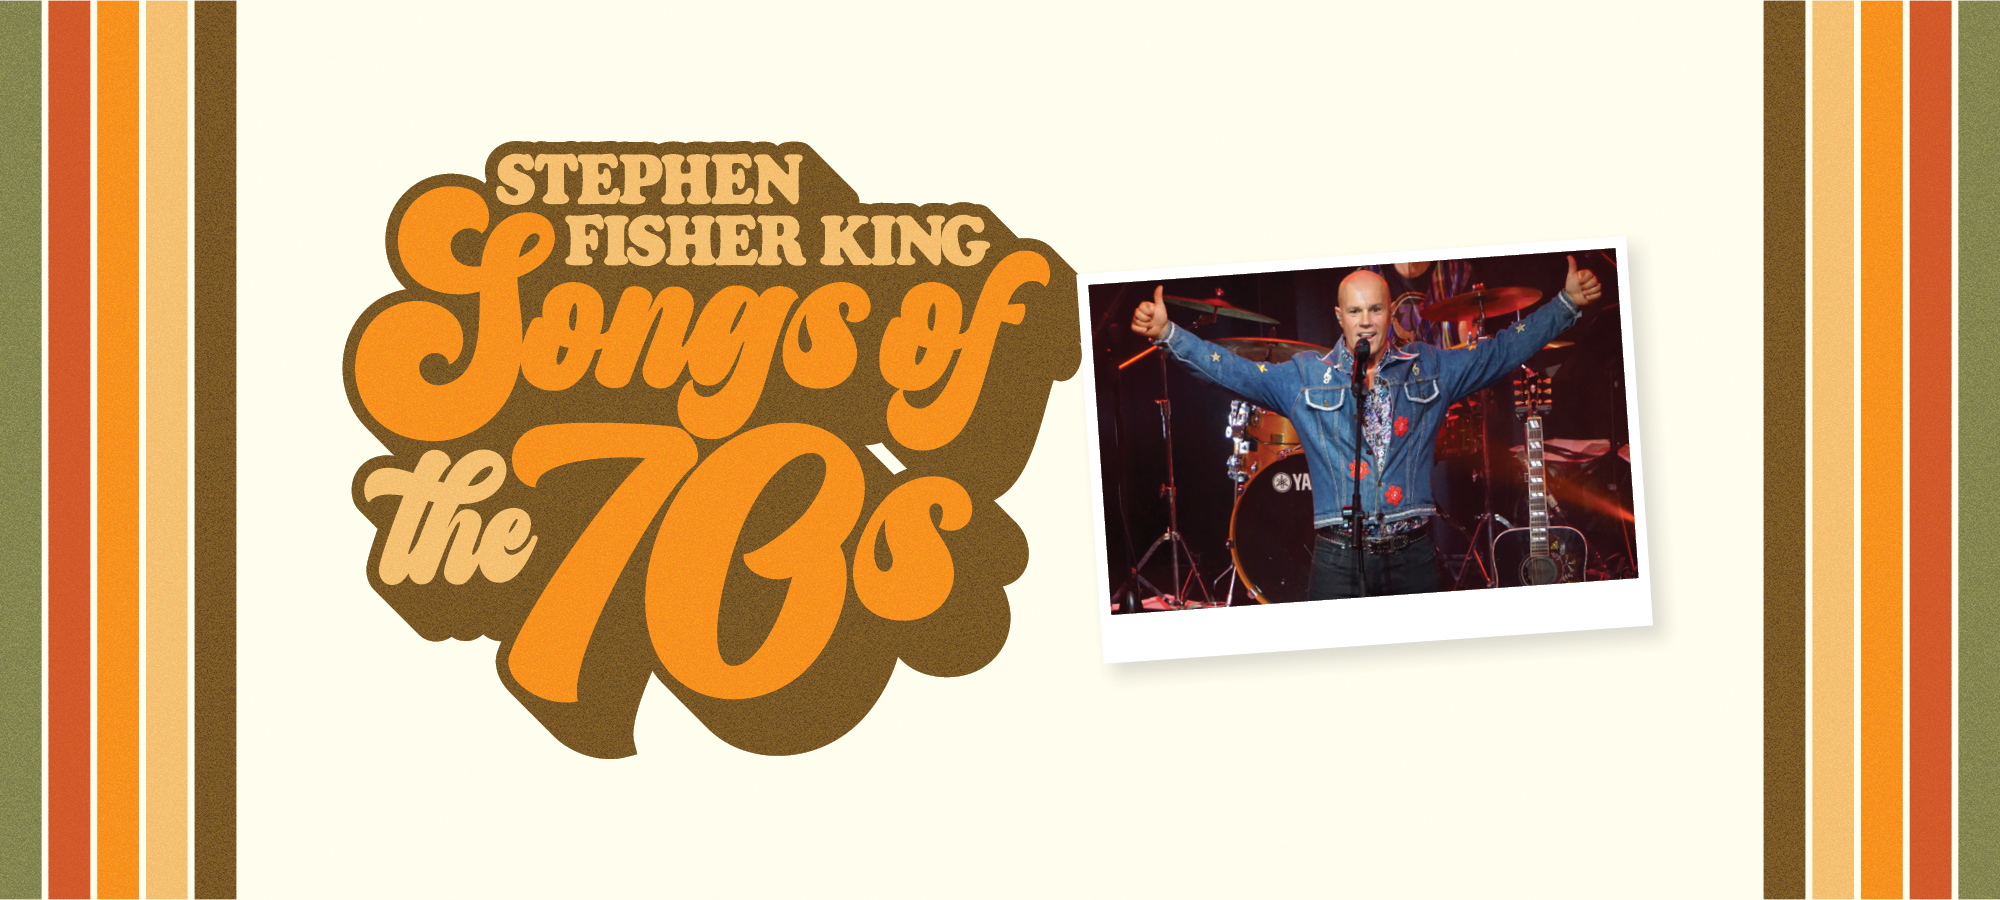 Stephen Fisher King – Songs of the 70’s